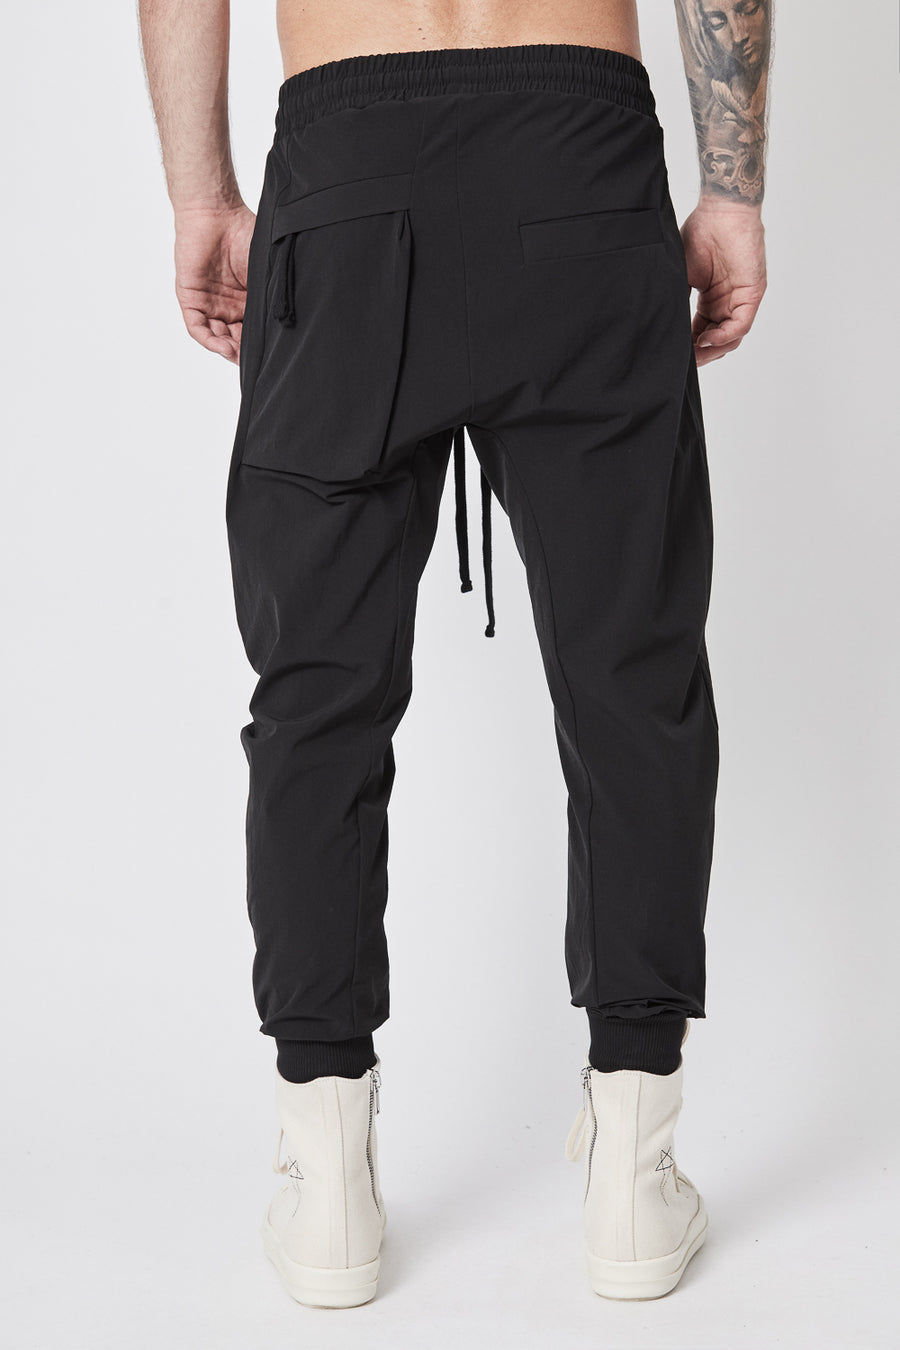 Buy the Thom Krom M ST 309 Sweatpants in Black at Intro. Spend £50 for free UK delivery. Official stockists. We ship worldwide.